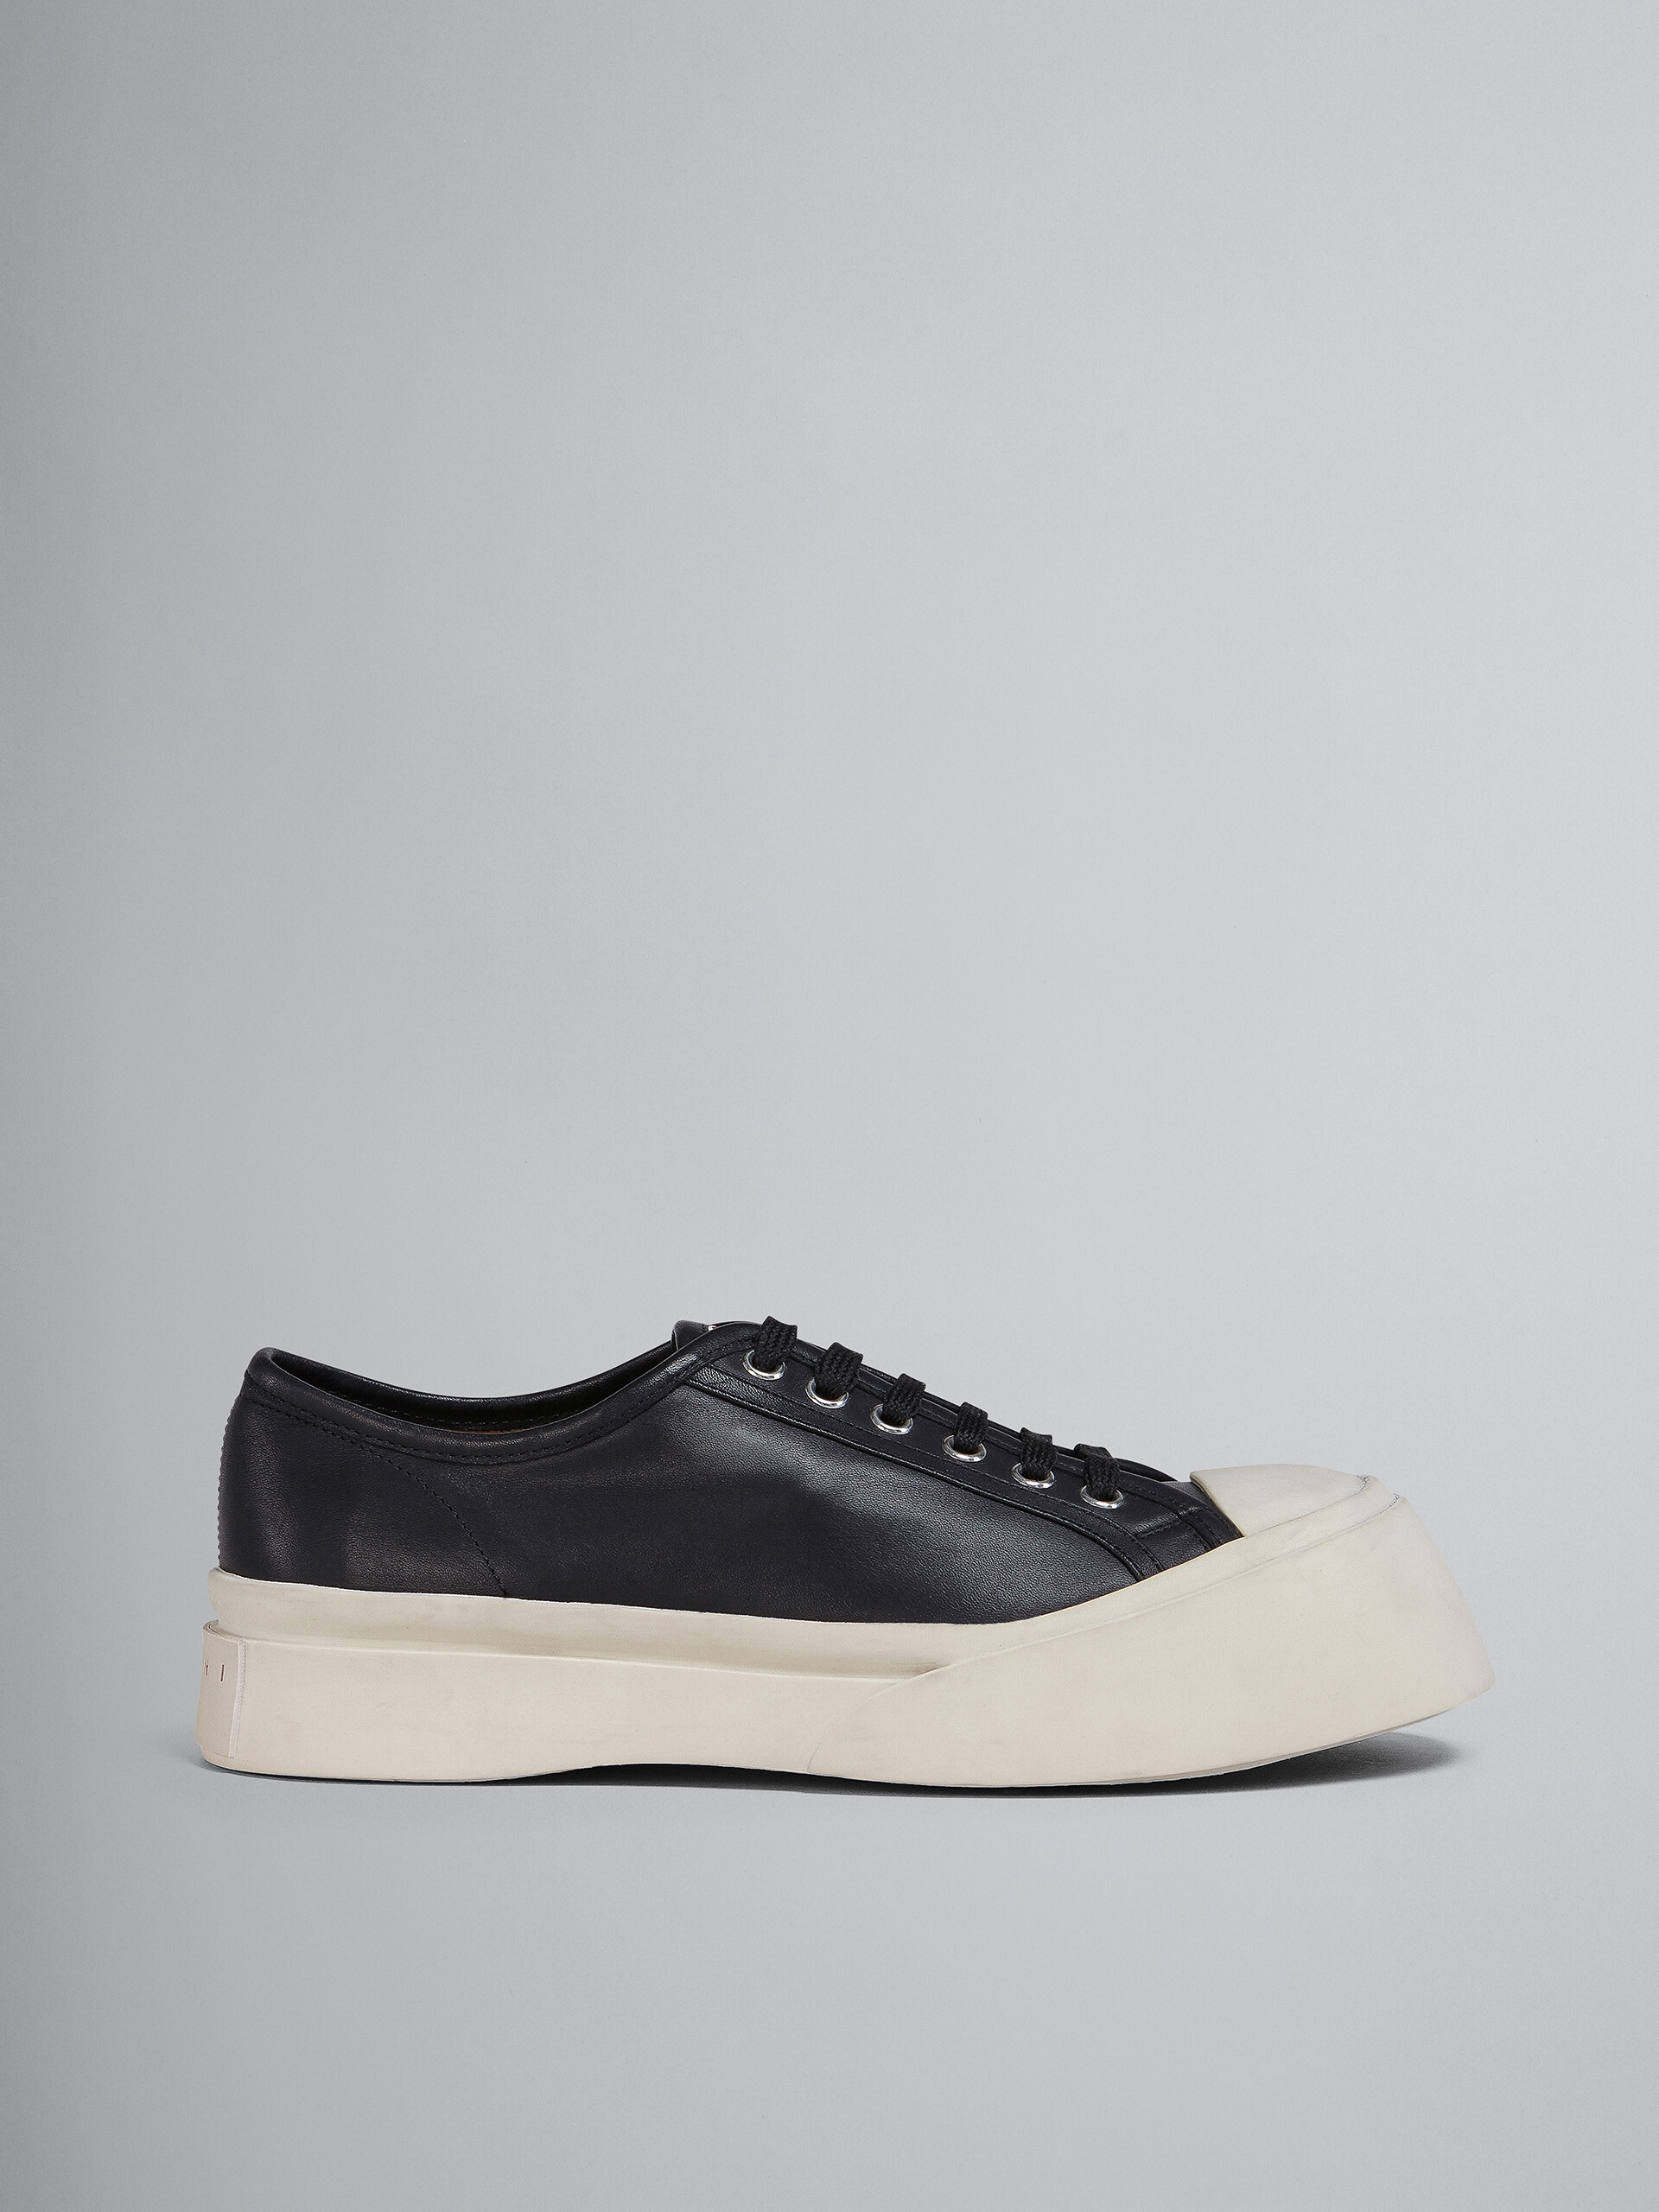 Blue nappa leather Pablo sneaker - Sneakers - Image 1